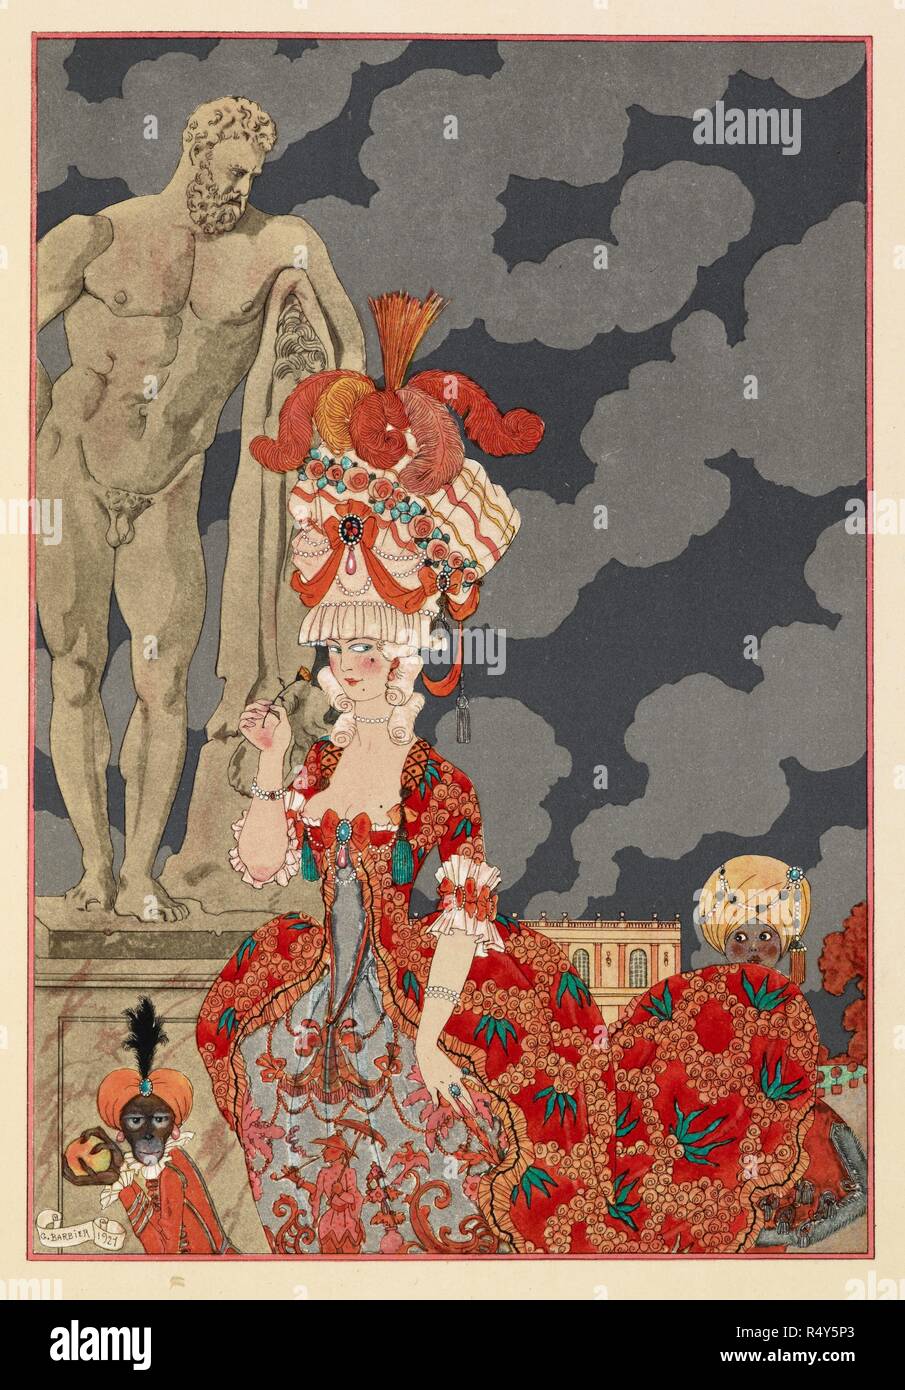 CortÃ¨ge. An attractive woman waering a red dress and elaborate hat. A small monkey and boy. FÃªtes galantes. [PoÃ¨mes]. Illustrations de George Barbier. Paris: H. Piazza, 1928. FÃªtes Galantes is an album consisting of romantic prints of French life among the upper classes of the 19th century. Rich aristocrats of the French court used to play gallant scenes from the commedia dellâ€™ arte that were called Fetes Galantes. The prints accompany Paul Verlaine's poetry. Each album contains 20 lithograph prints with pochoir highlighting by George Barbier. Source: L.45/2847, before page 31. Language: Stock Photo